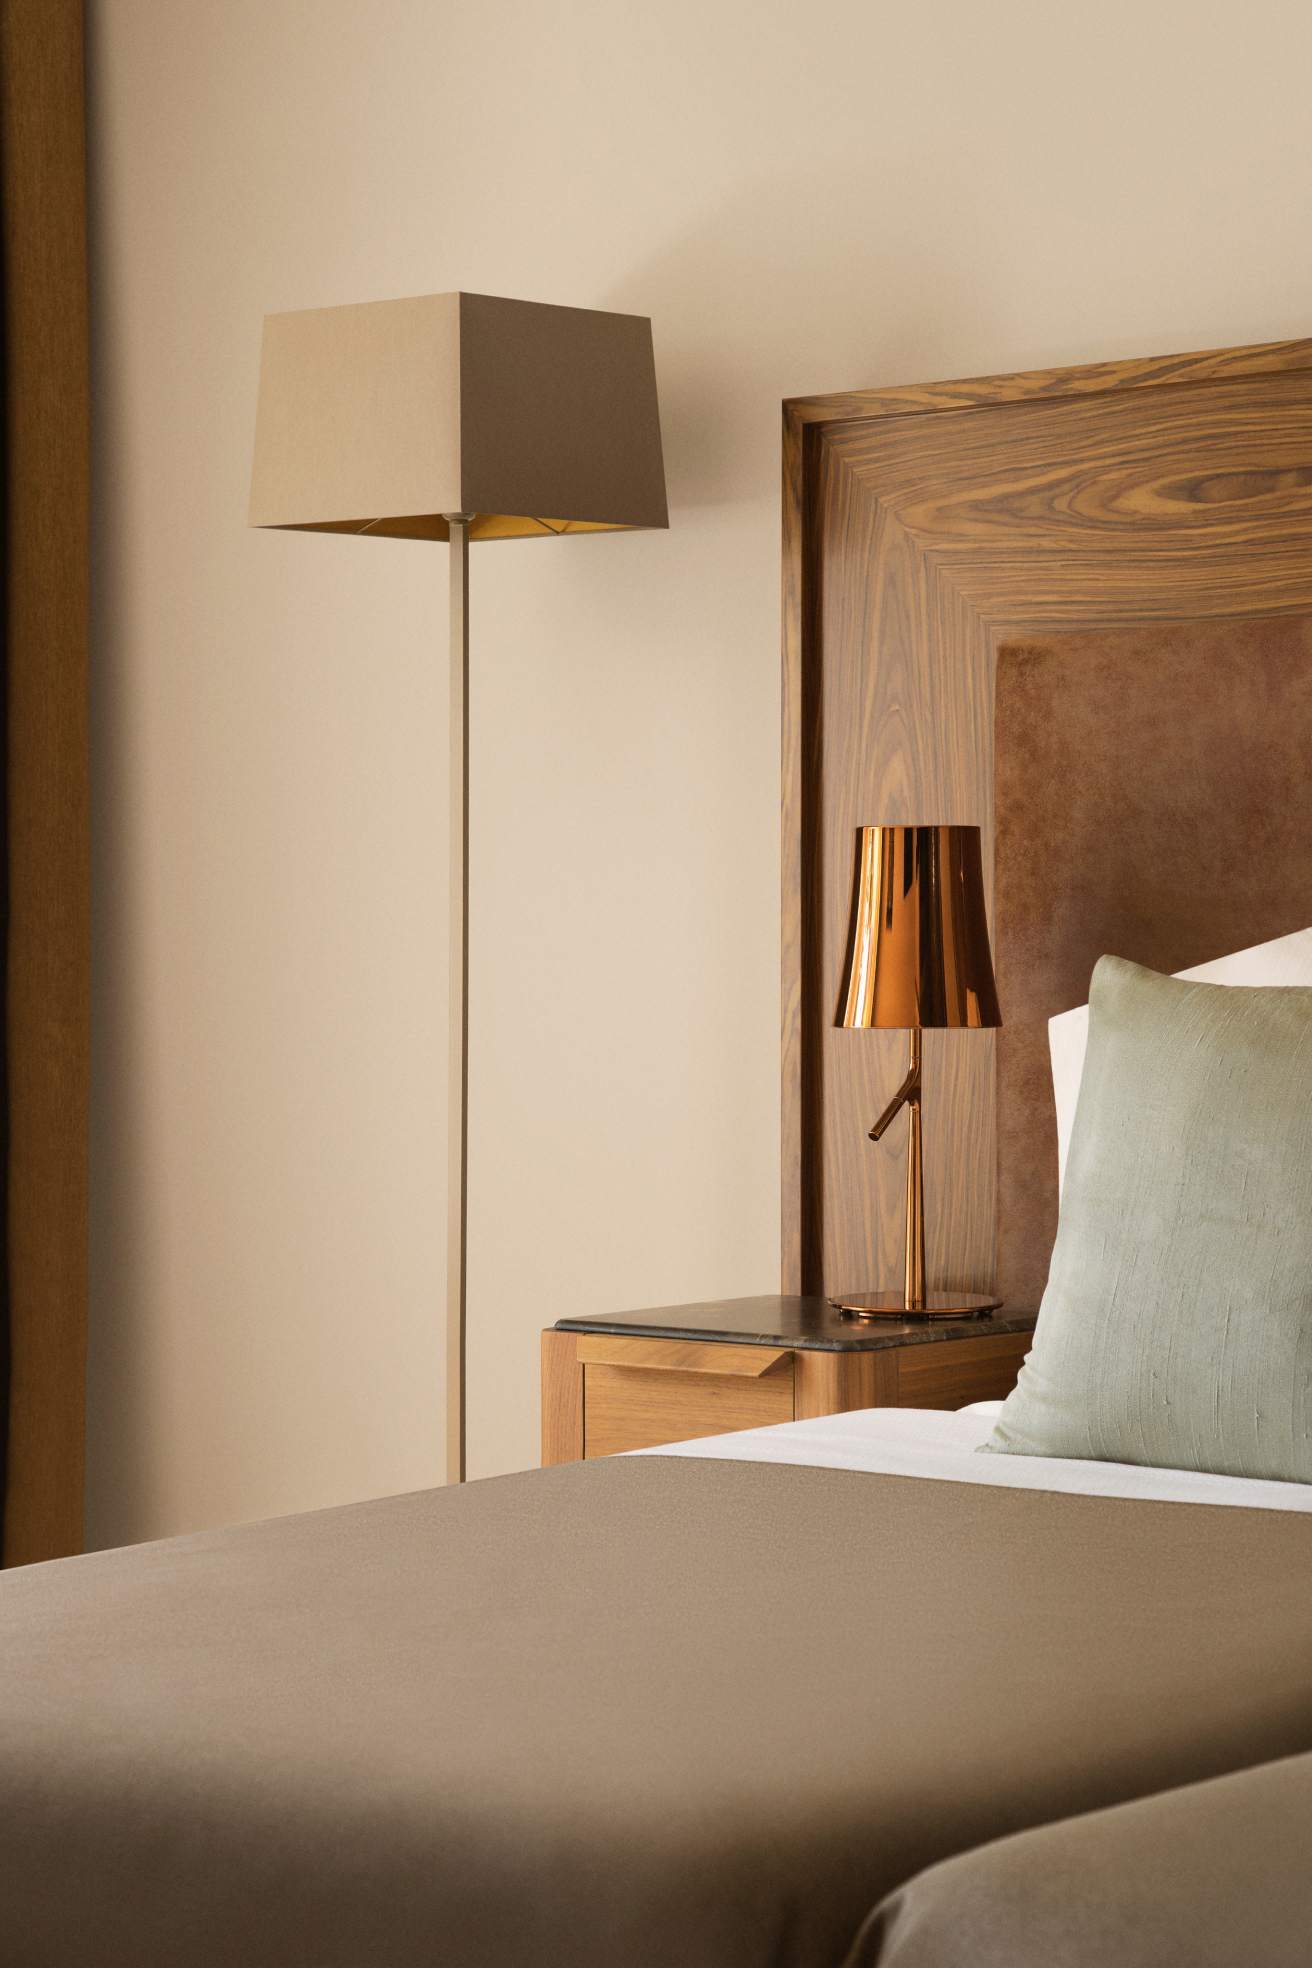 A hotel room with a bed, headboard, and bedside lamp, exuding warmth and comfort